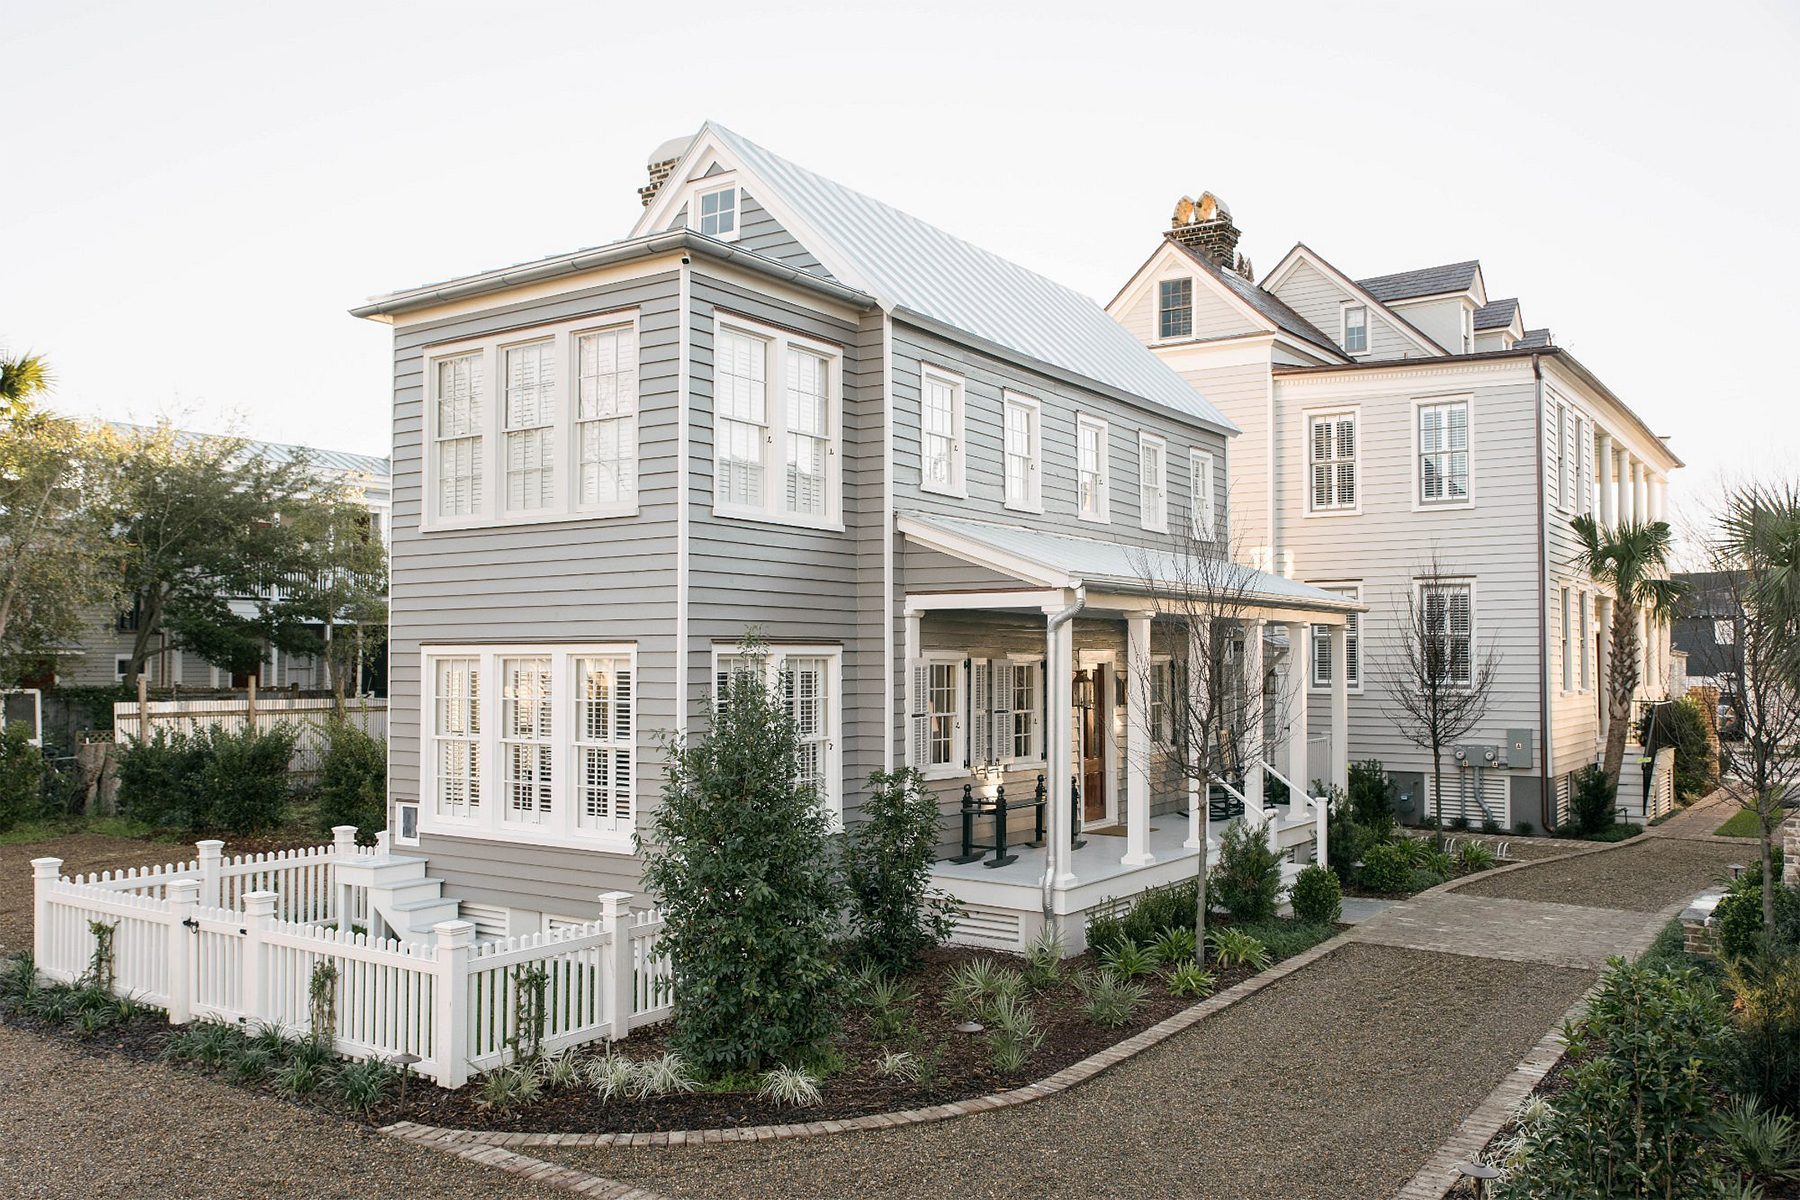 <h3 class="">Charleston, South Carolina</h3> <p class=""><strong>Best for: </strong>An uber-romantic stay with French flair and Southern hospitality</p> <p>Step into the salon for a glass of complimentary champagne when you arrive at <a href="https://www.tripadvisor.com/Hotel_Review-g54171-d12076018-Reviews-86_Cannon_Historic_Inn-Charleston_South_Carolina.html" rel="noopener">86 Cannon</a>, a boutique three-story property situated in the heart of Charleston's historic district. The inn's five elegant rooms and suites, featuring midcentury design and classic French decor, are perfect for an intimate adults-only getaway. And the timeless architecture of the property (in a quiet, residential part of town) has been beautifully preserved and updated with fresh touches including cozy piazzas, a courtyard garden and an inviting third-floor library where guests can peruse a vintage book while sipping a glass of wine.</p> <p>In the morning, the cafe offers a European Continental-style breakfast with homemade yogurt, granola and locally sourced pastries. There's also a complimentary wine-and-cheese pairing at 5 p.m. that you can enjoy indoors or outside on the piazza. Guests of the property rave about the gracious and attentive staff who made them feel at home during their stay. And if you want to check out the city, 86 Cannon is located just a short distance from Charleston's famed restaurants and nightlife.</p> <p><strong>Pros:</strong></p> <ul> <li class="">Perfect for an adults-only getaway</li> <li class="">Complimentary use of Linus bicycles throughout your stay</li> <li class="">Personalized concierge service</li> </ul> <p><strong>Con:</strong></p> <ul> <li class="">Children are not permitted</li> </ul> <p class="listicle-page__cta-button-shop"><a class="shop-btn" href="https://www.tripadvisor.com/Hotel_Review-g54171-d12076018-Reviews-86_Cannon_Historic_Inn-Charleston_South_Carolina.html">Book Now</a></p>